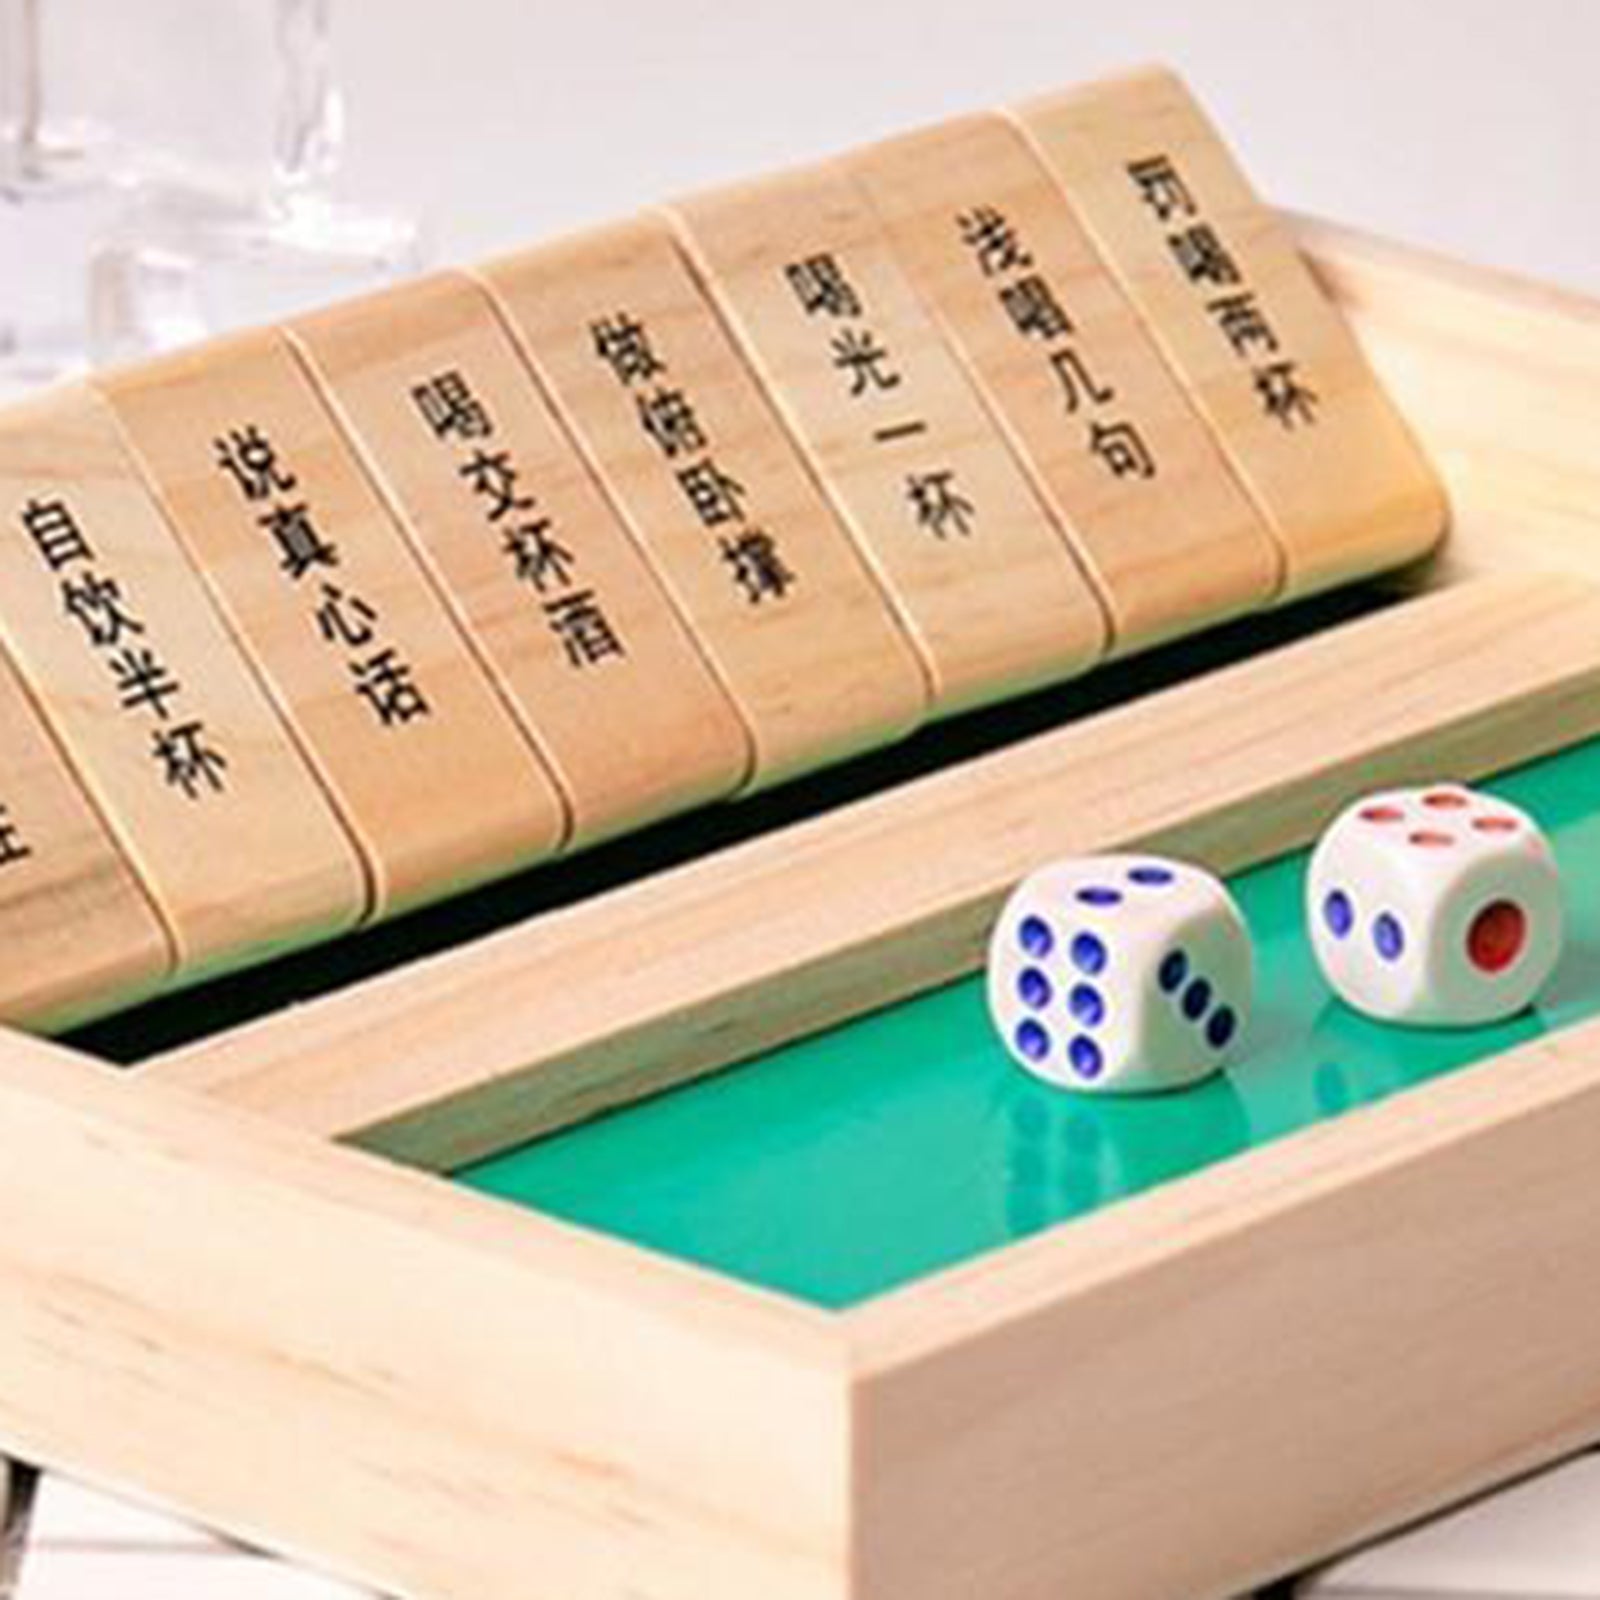 1-2 Player Board Game Wood Shut the Box for Adults Party Bar Drinking Toys